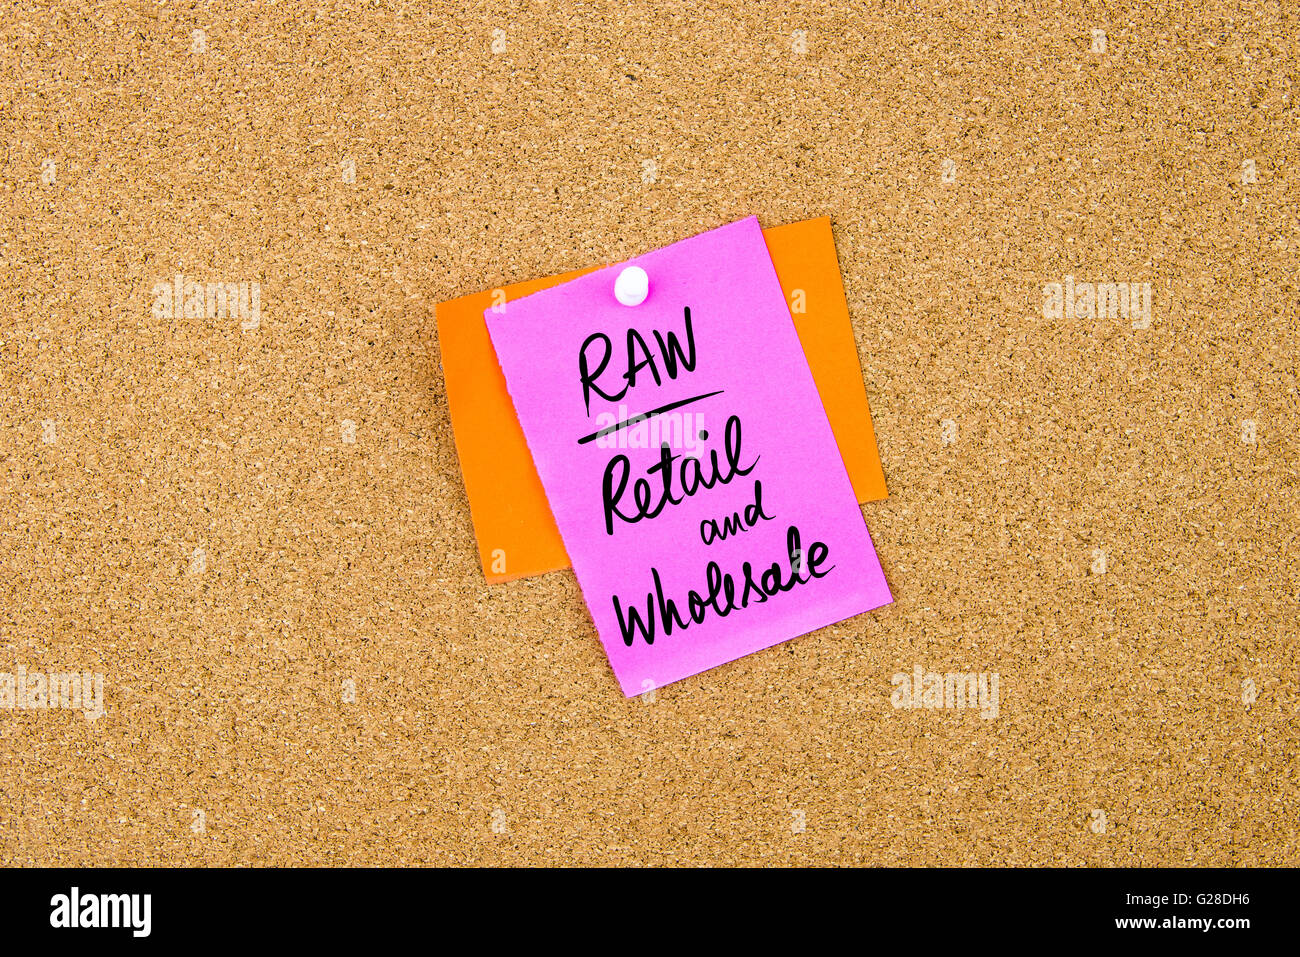 Business Acronym RAW as Retail and Wholesale written on paper note pinned on cork board with white thumbtack, copy space available Stock Photo